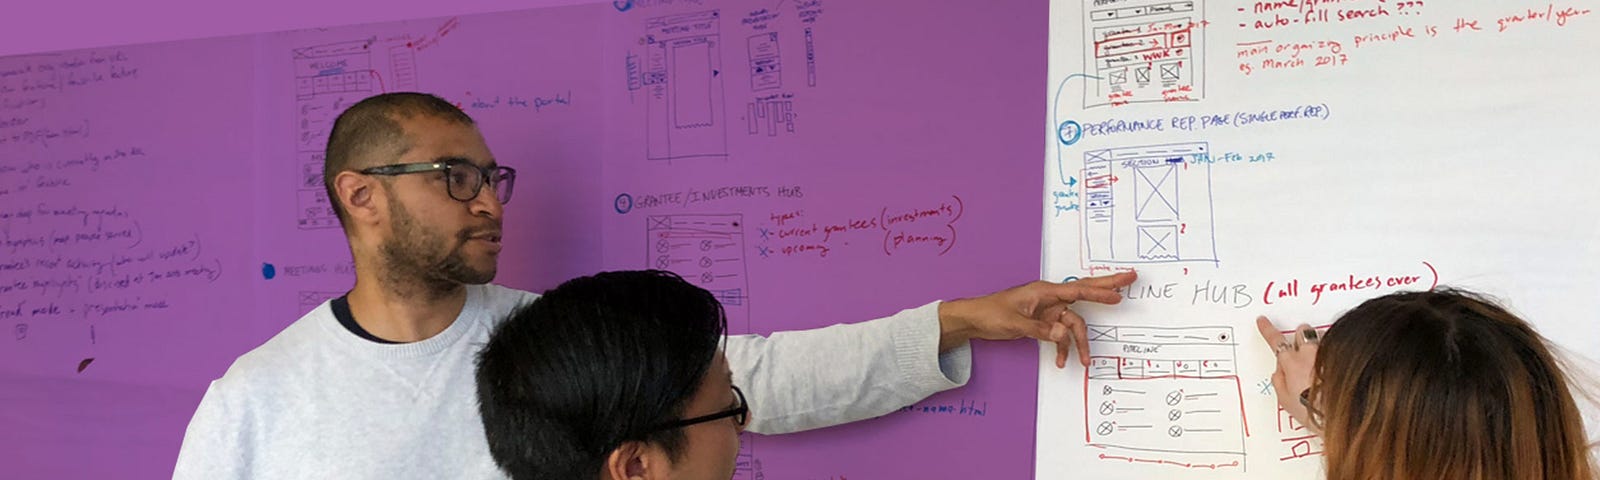 Man pointing at whiteboard full of wireframes with another man and woman looking at what hes pointing at.